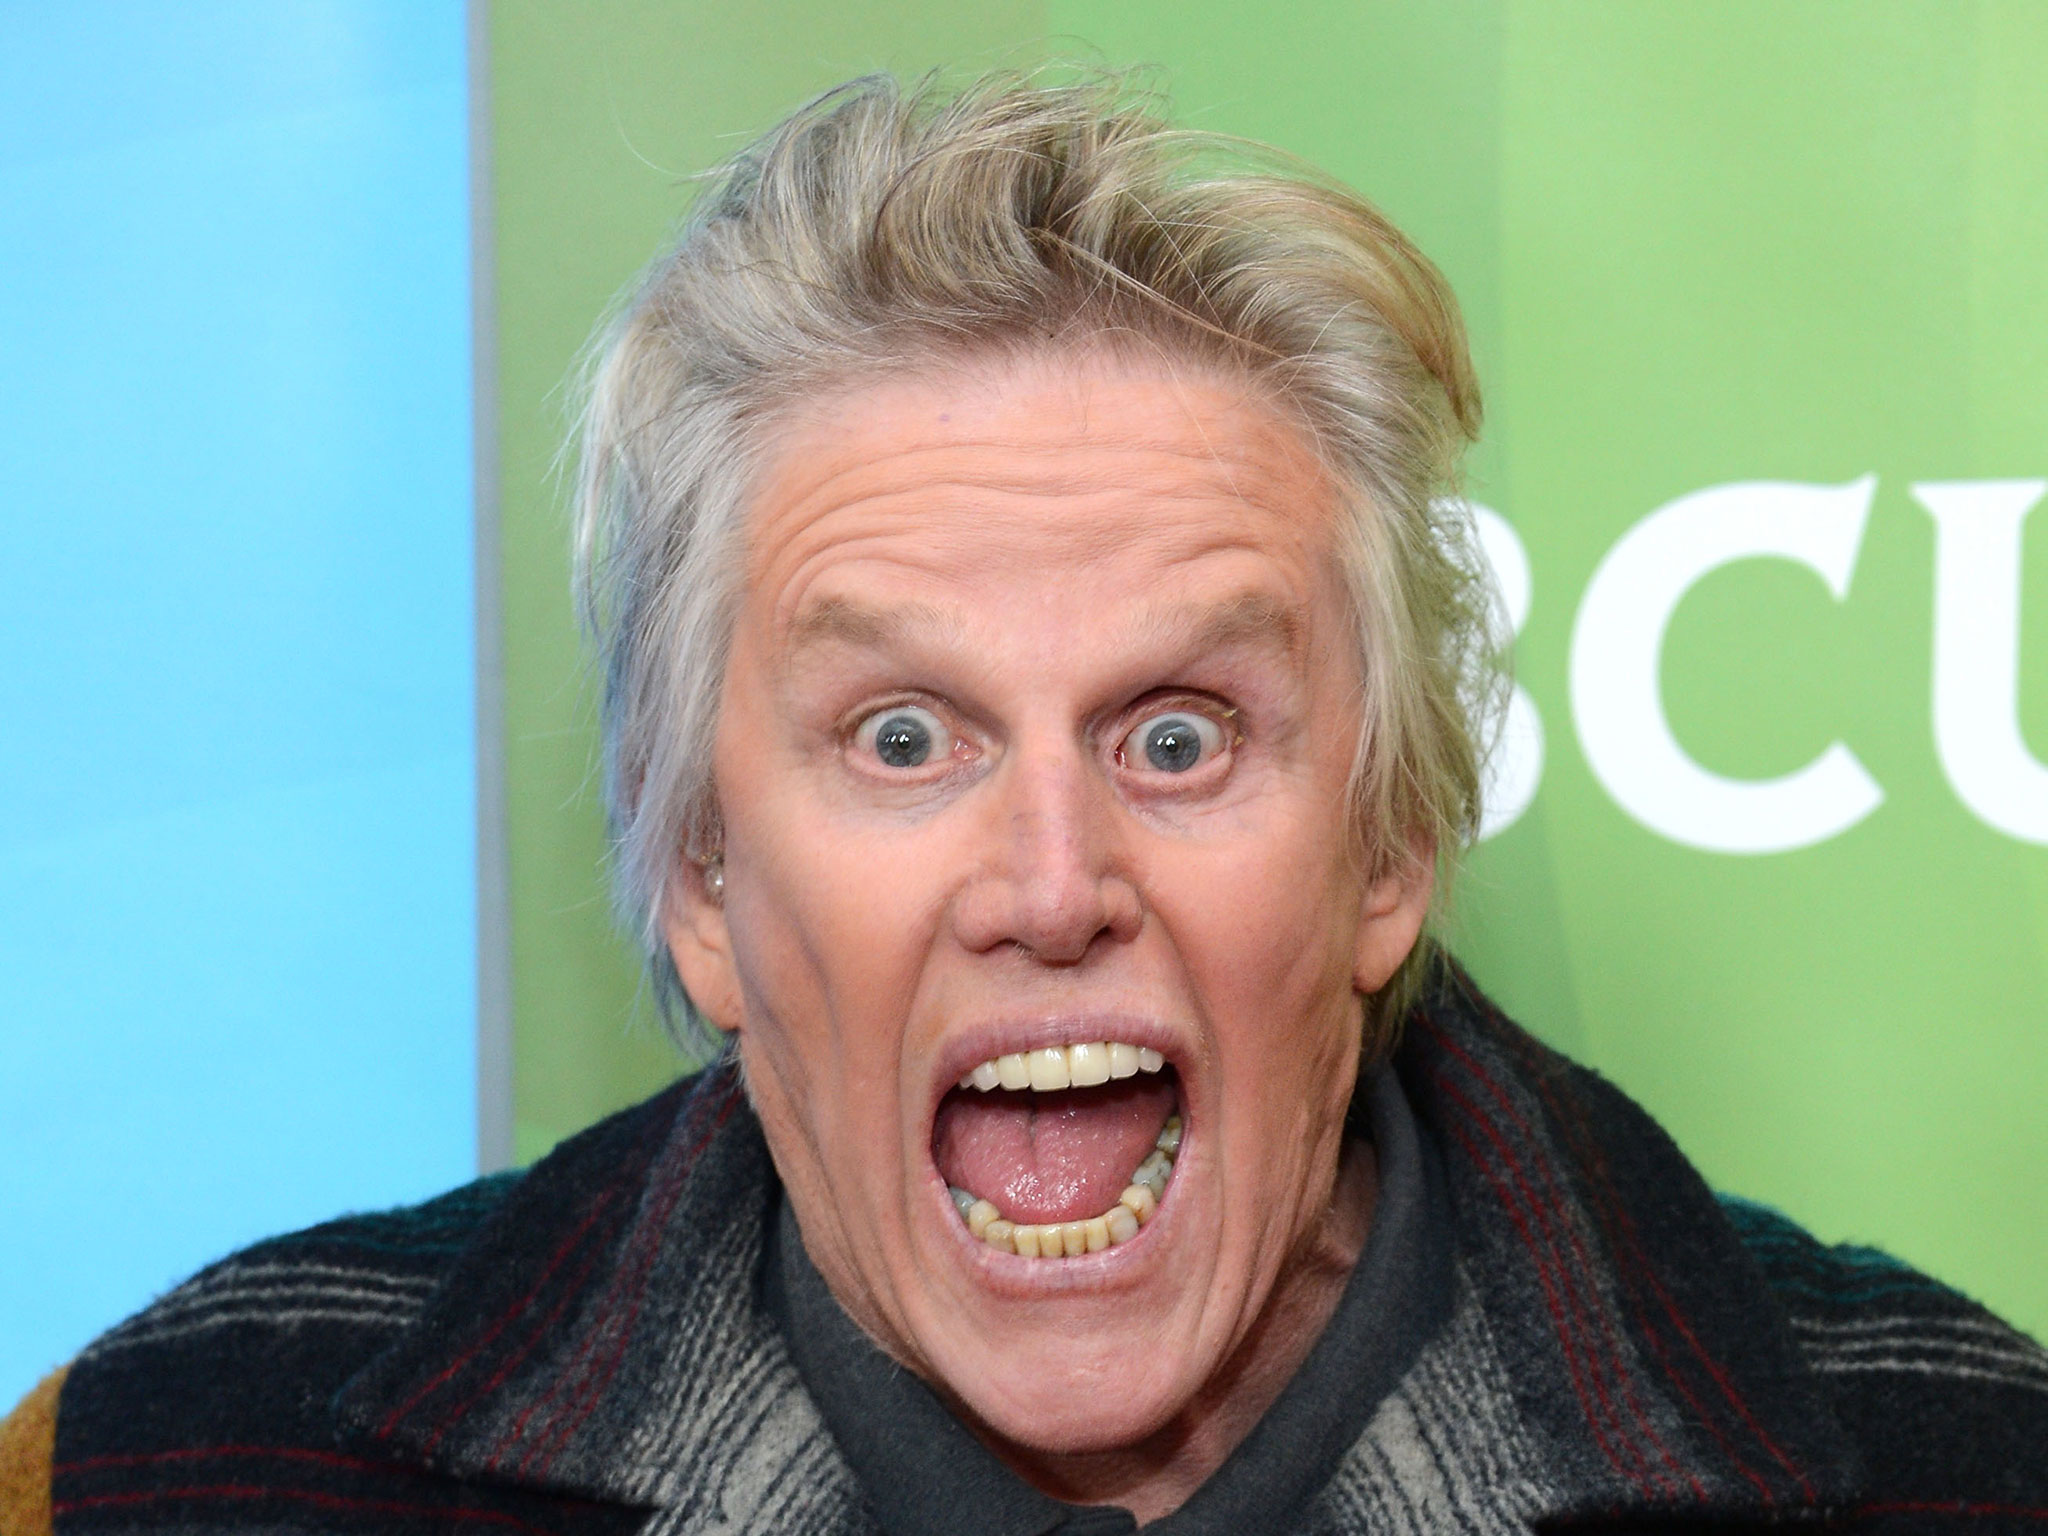 I don't care what anyone says, mental issues or not, Gary Busey is kick ass.